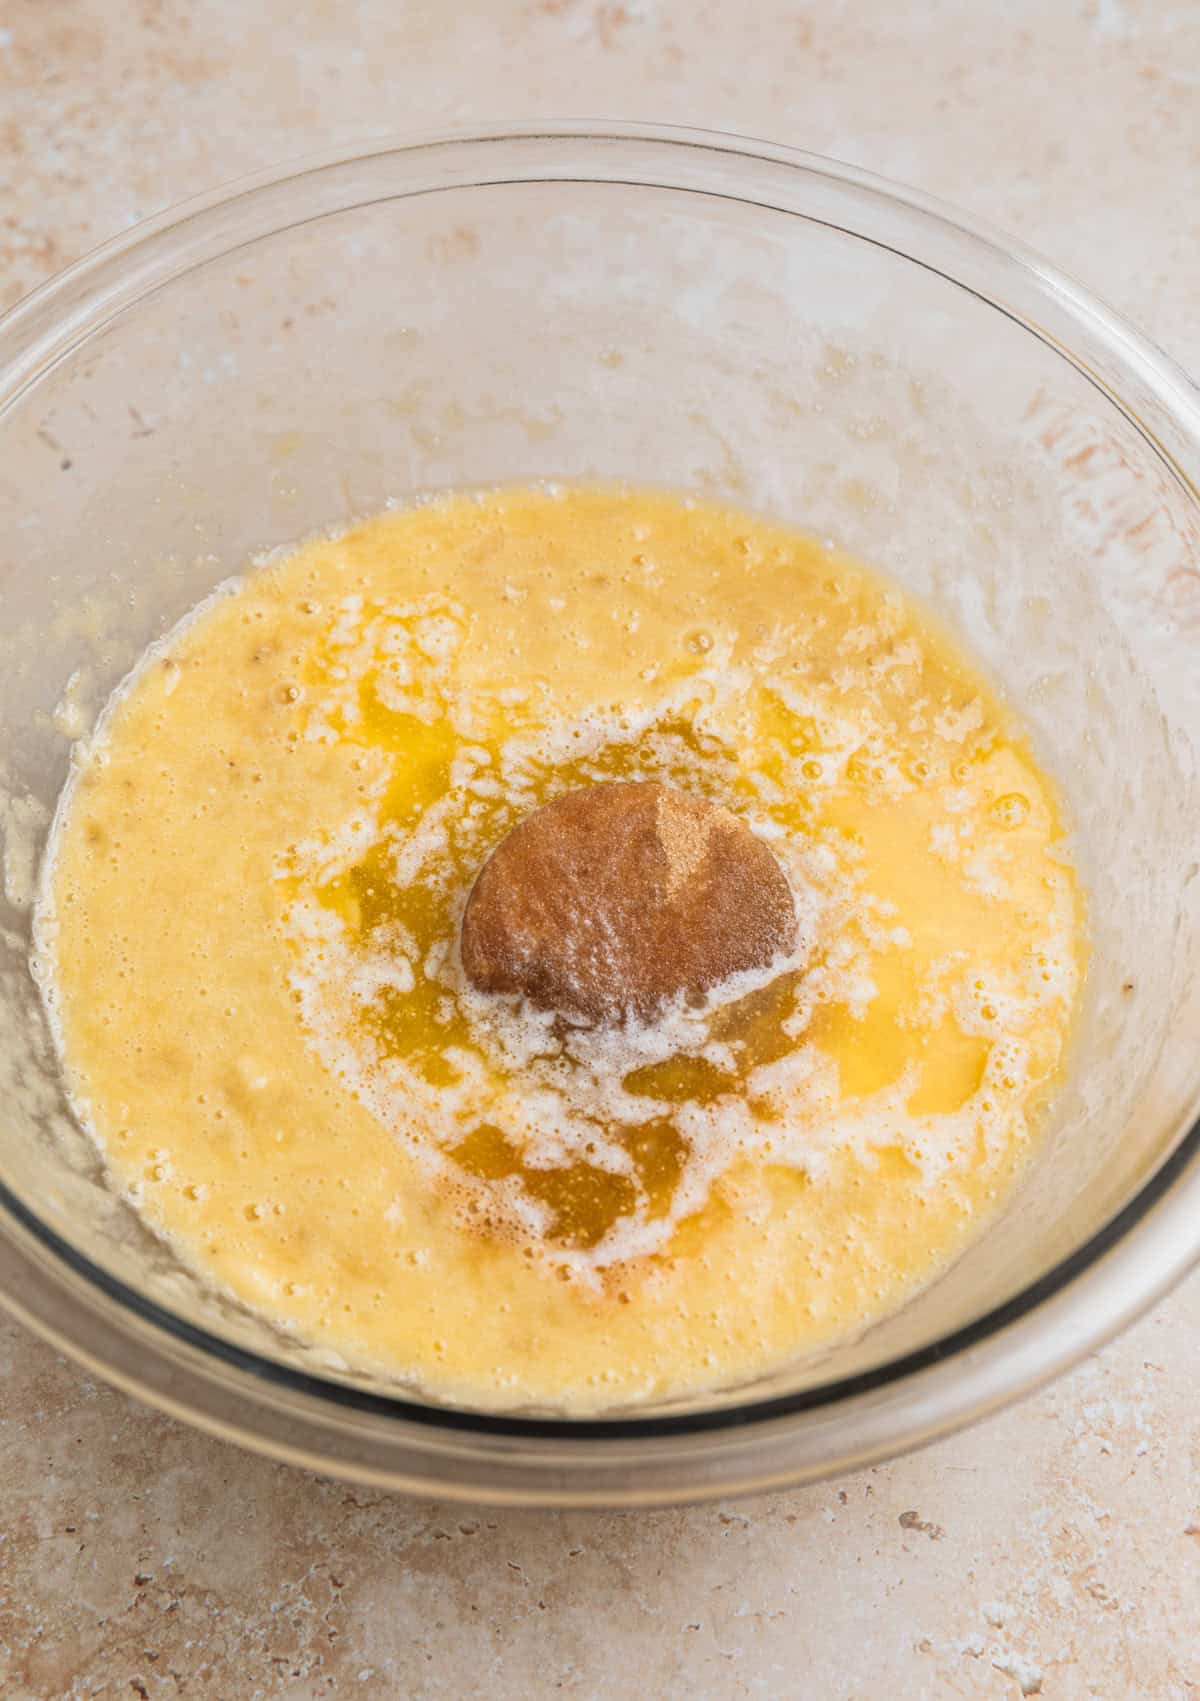 Brown sugar, butter and vanilla added to mashed banana in bowl.